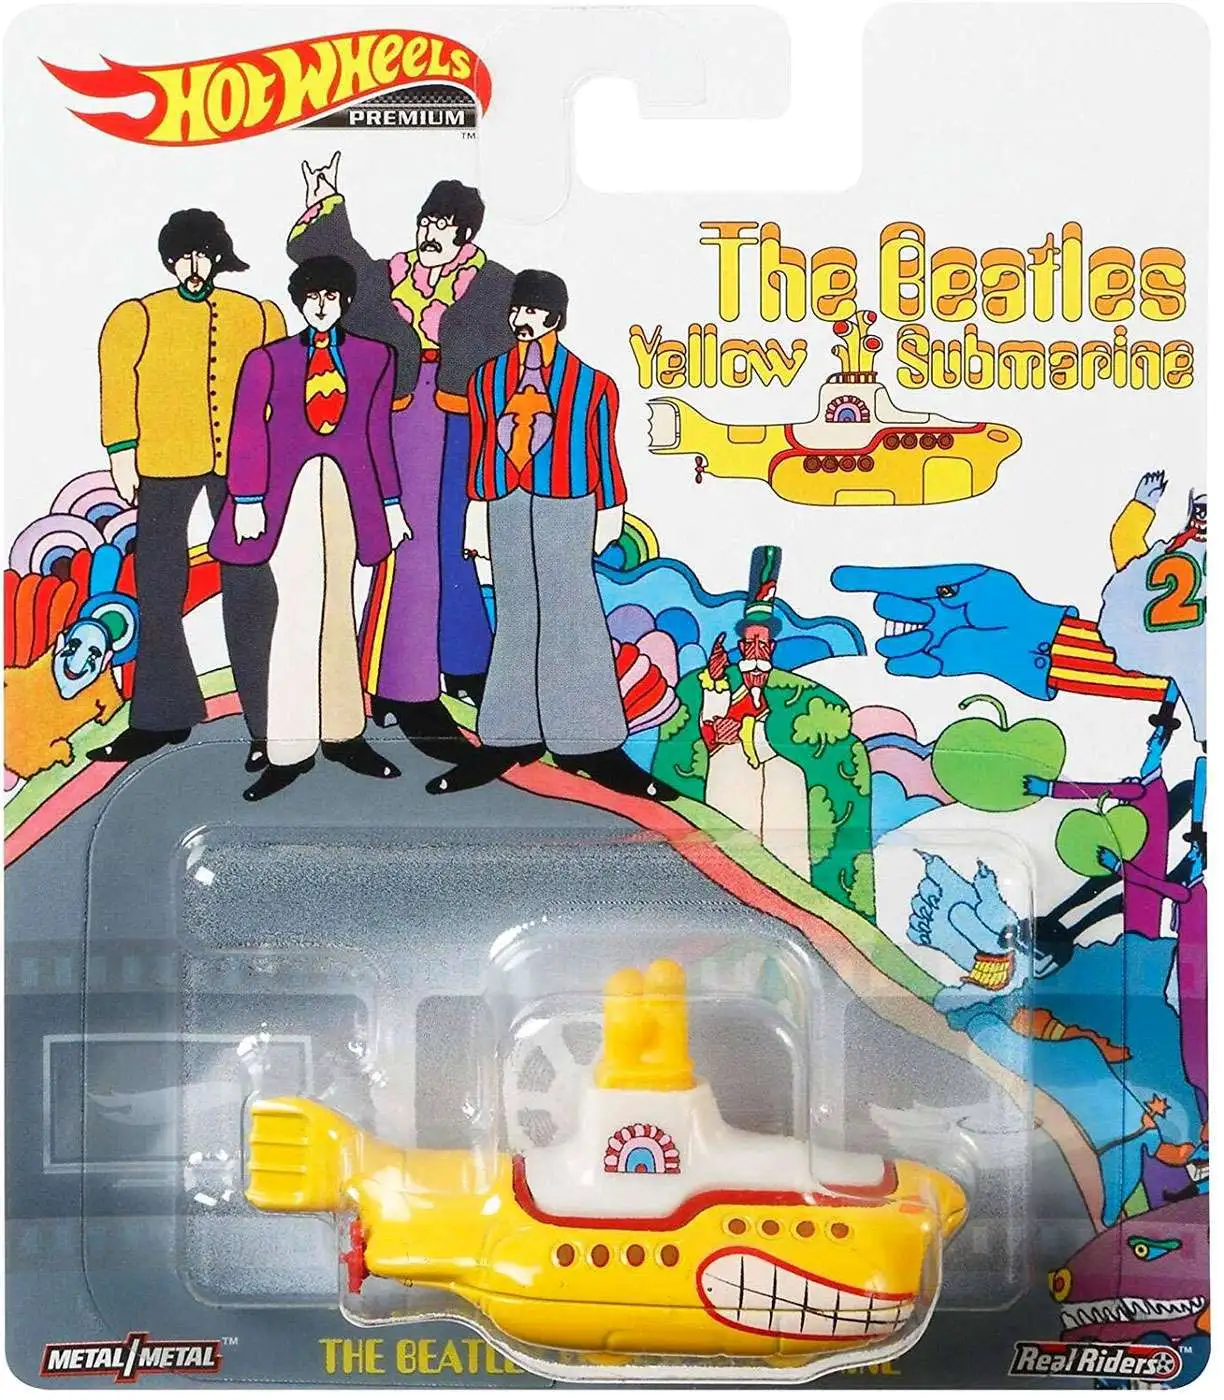 The Beatles Yellow Submarine Hot Wheels Limited Edition Set of 6 Diecast 